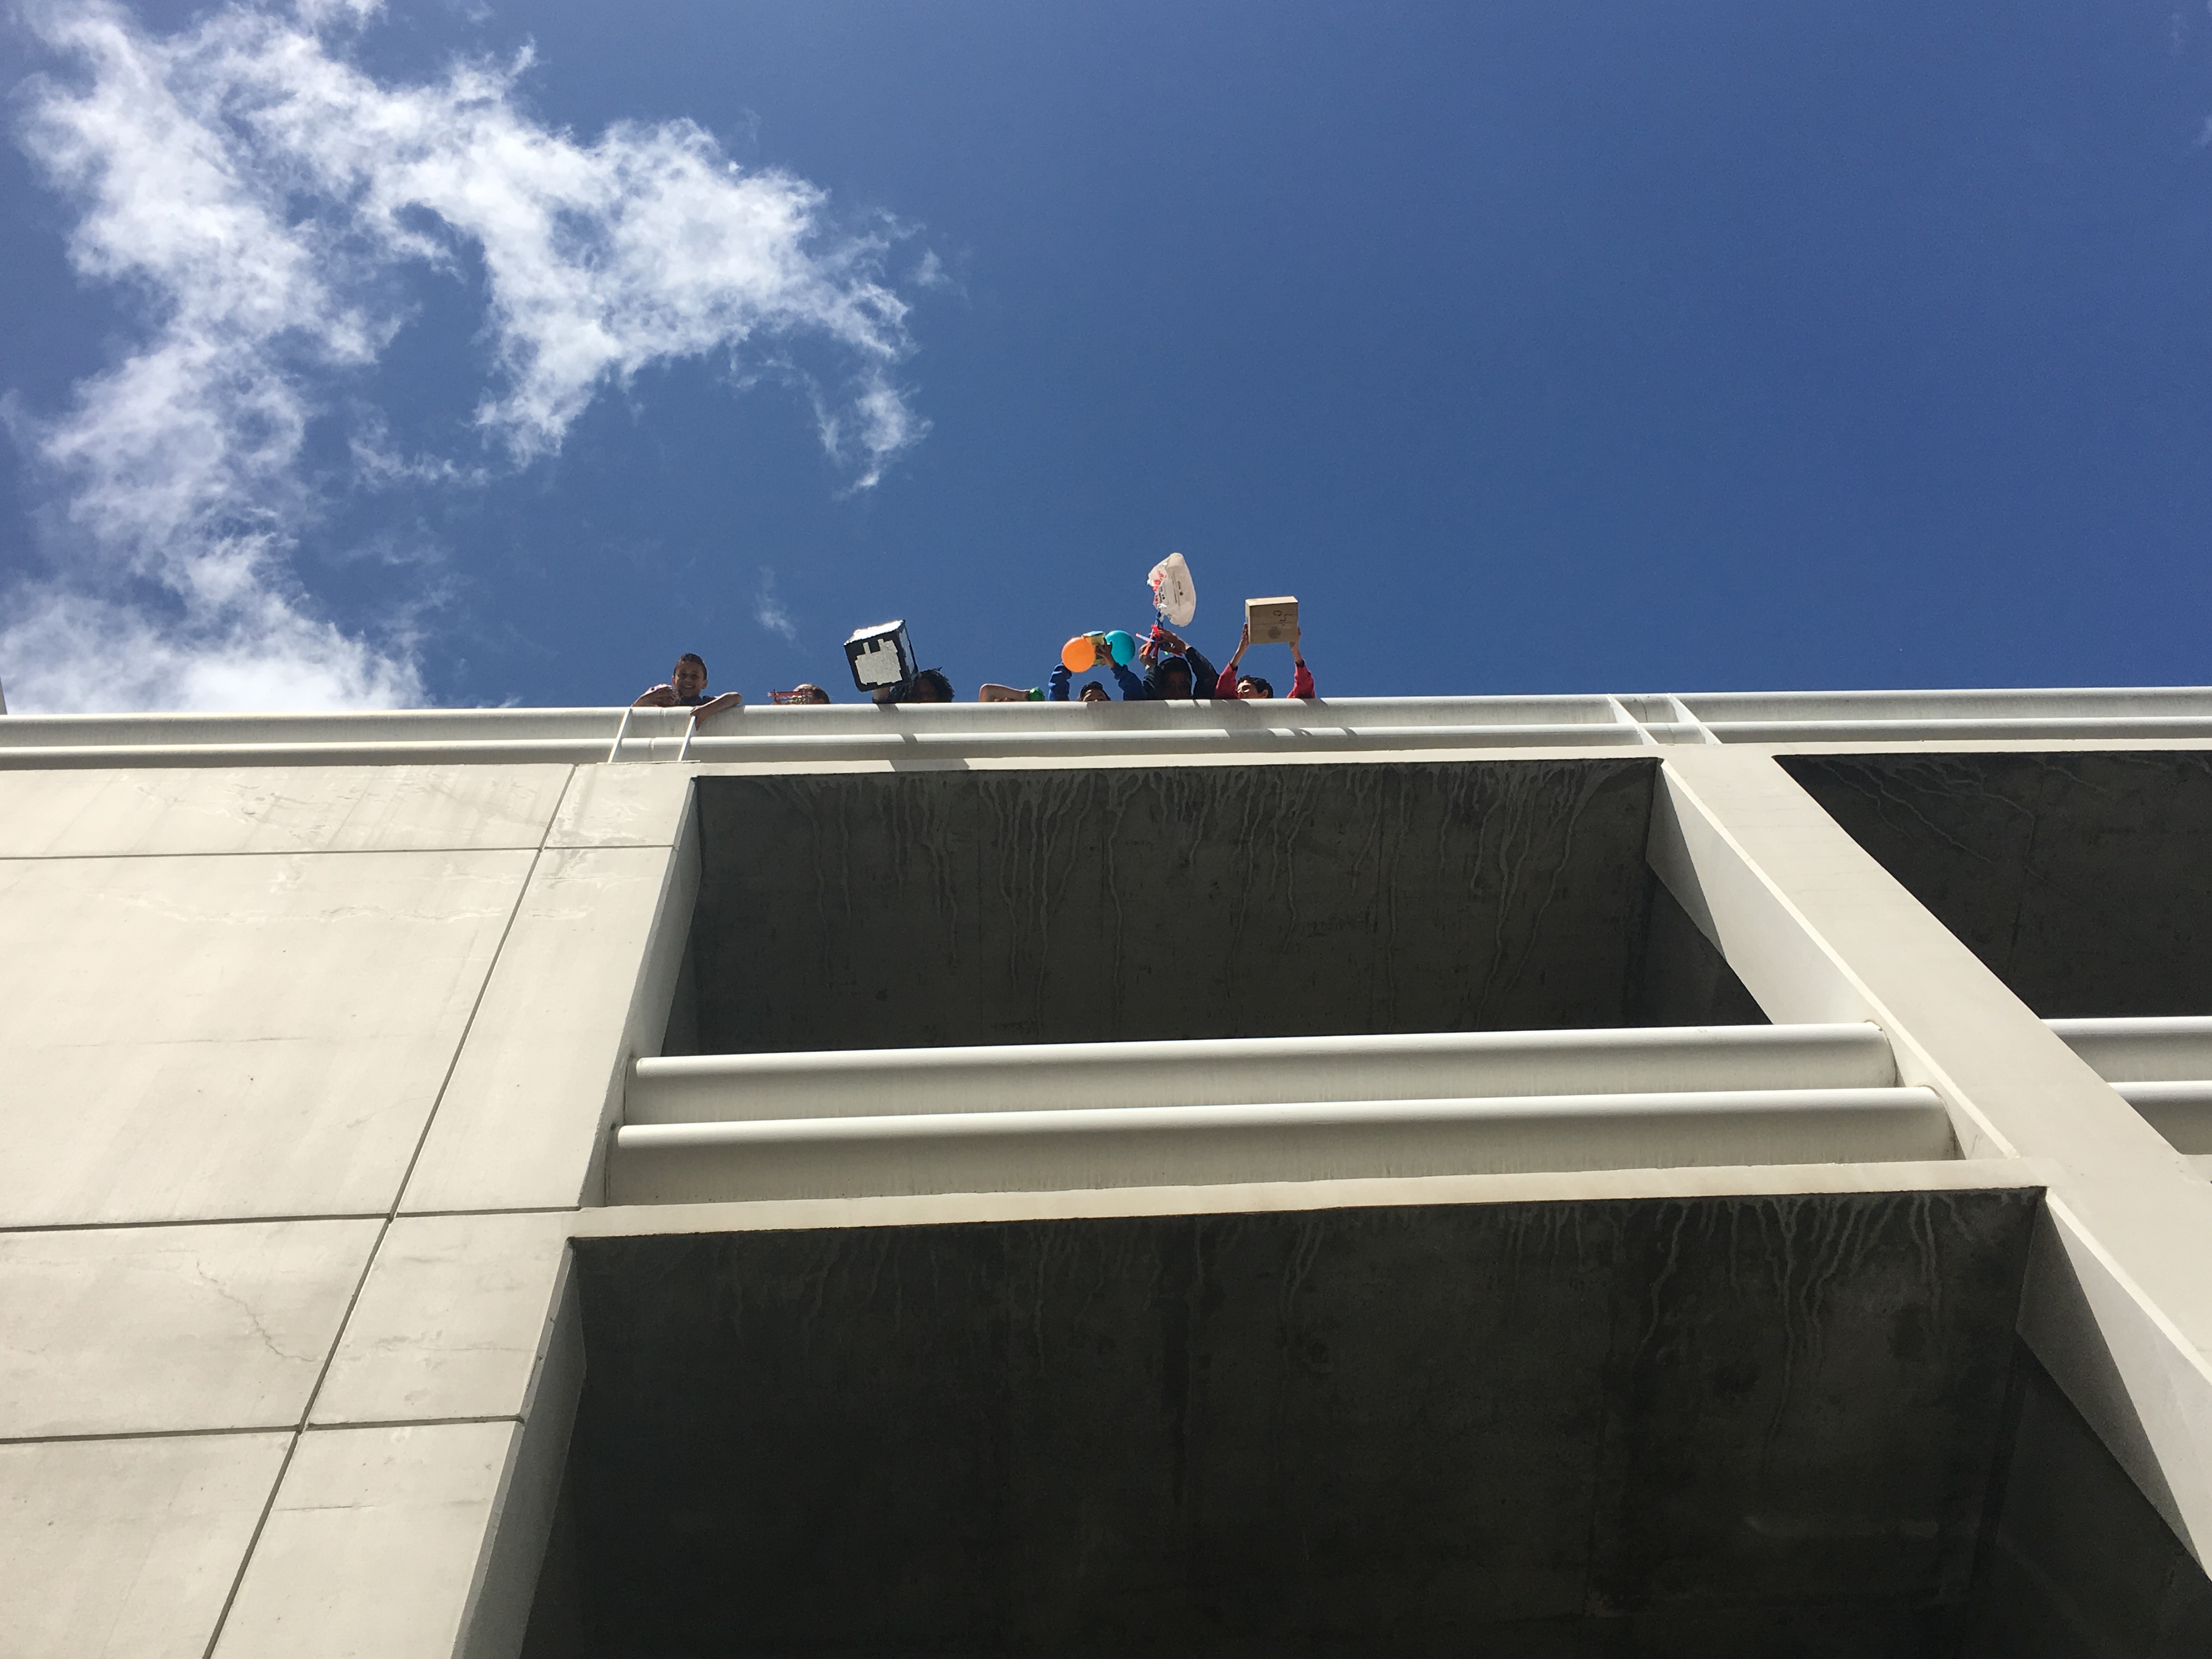 Egg drop contest at Van Nuys Station